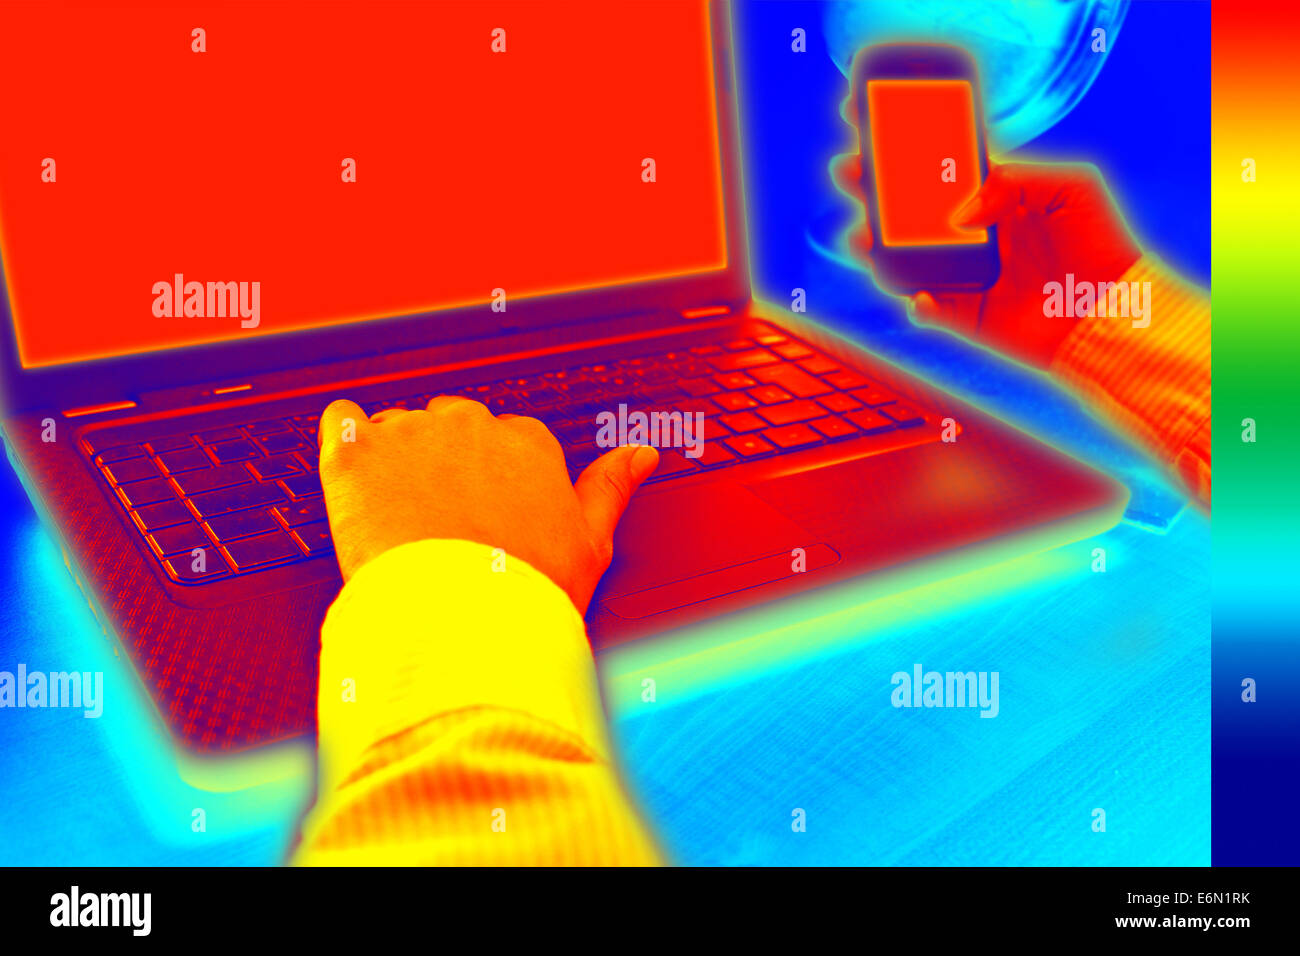 Infrared thermography image showing the heat and radiation of Notebook and smartphones in the office Stock Photo